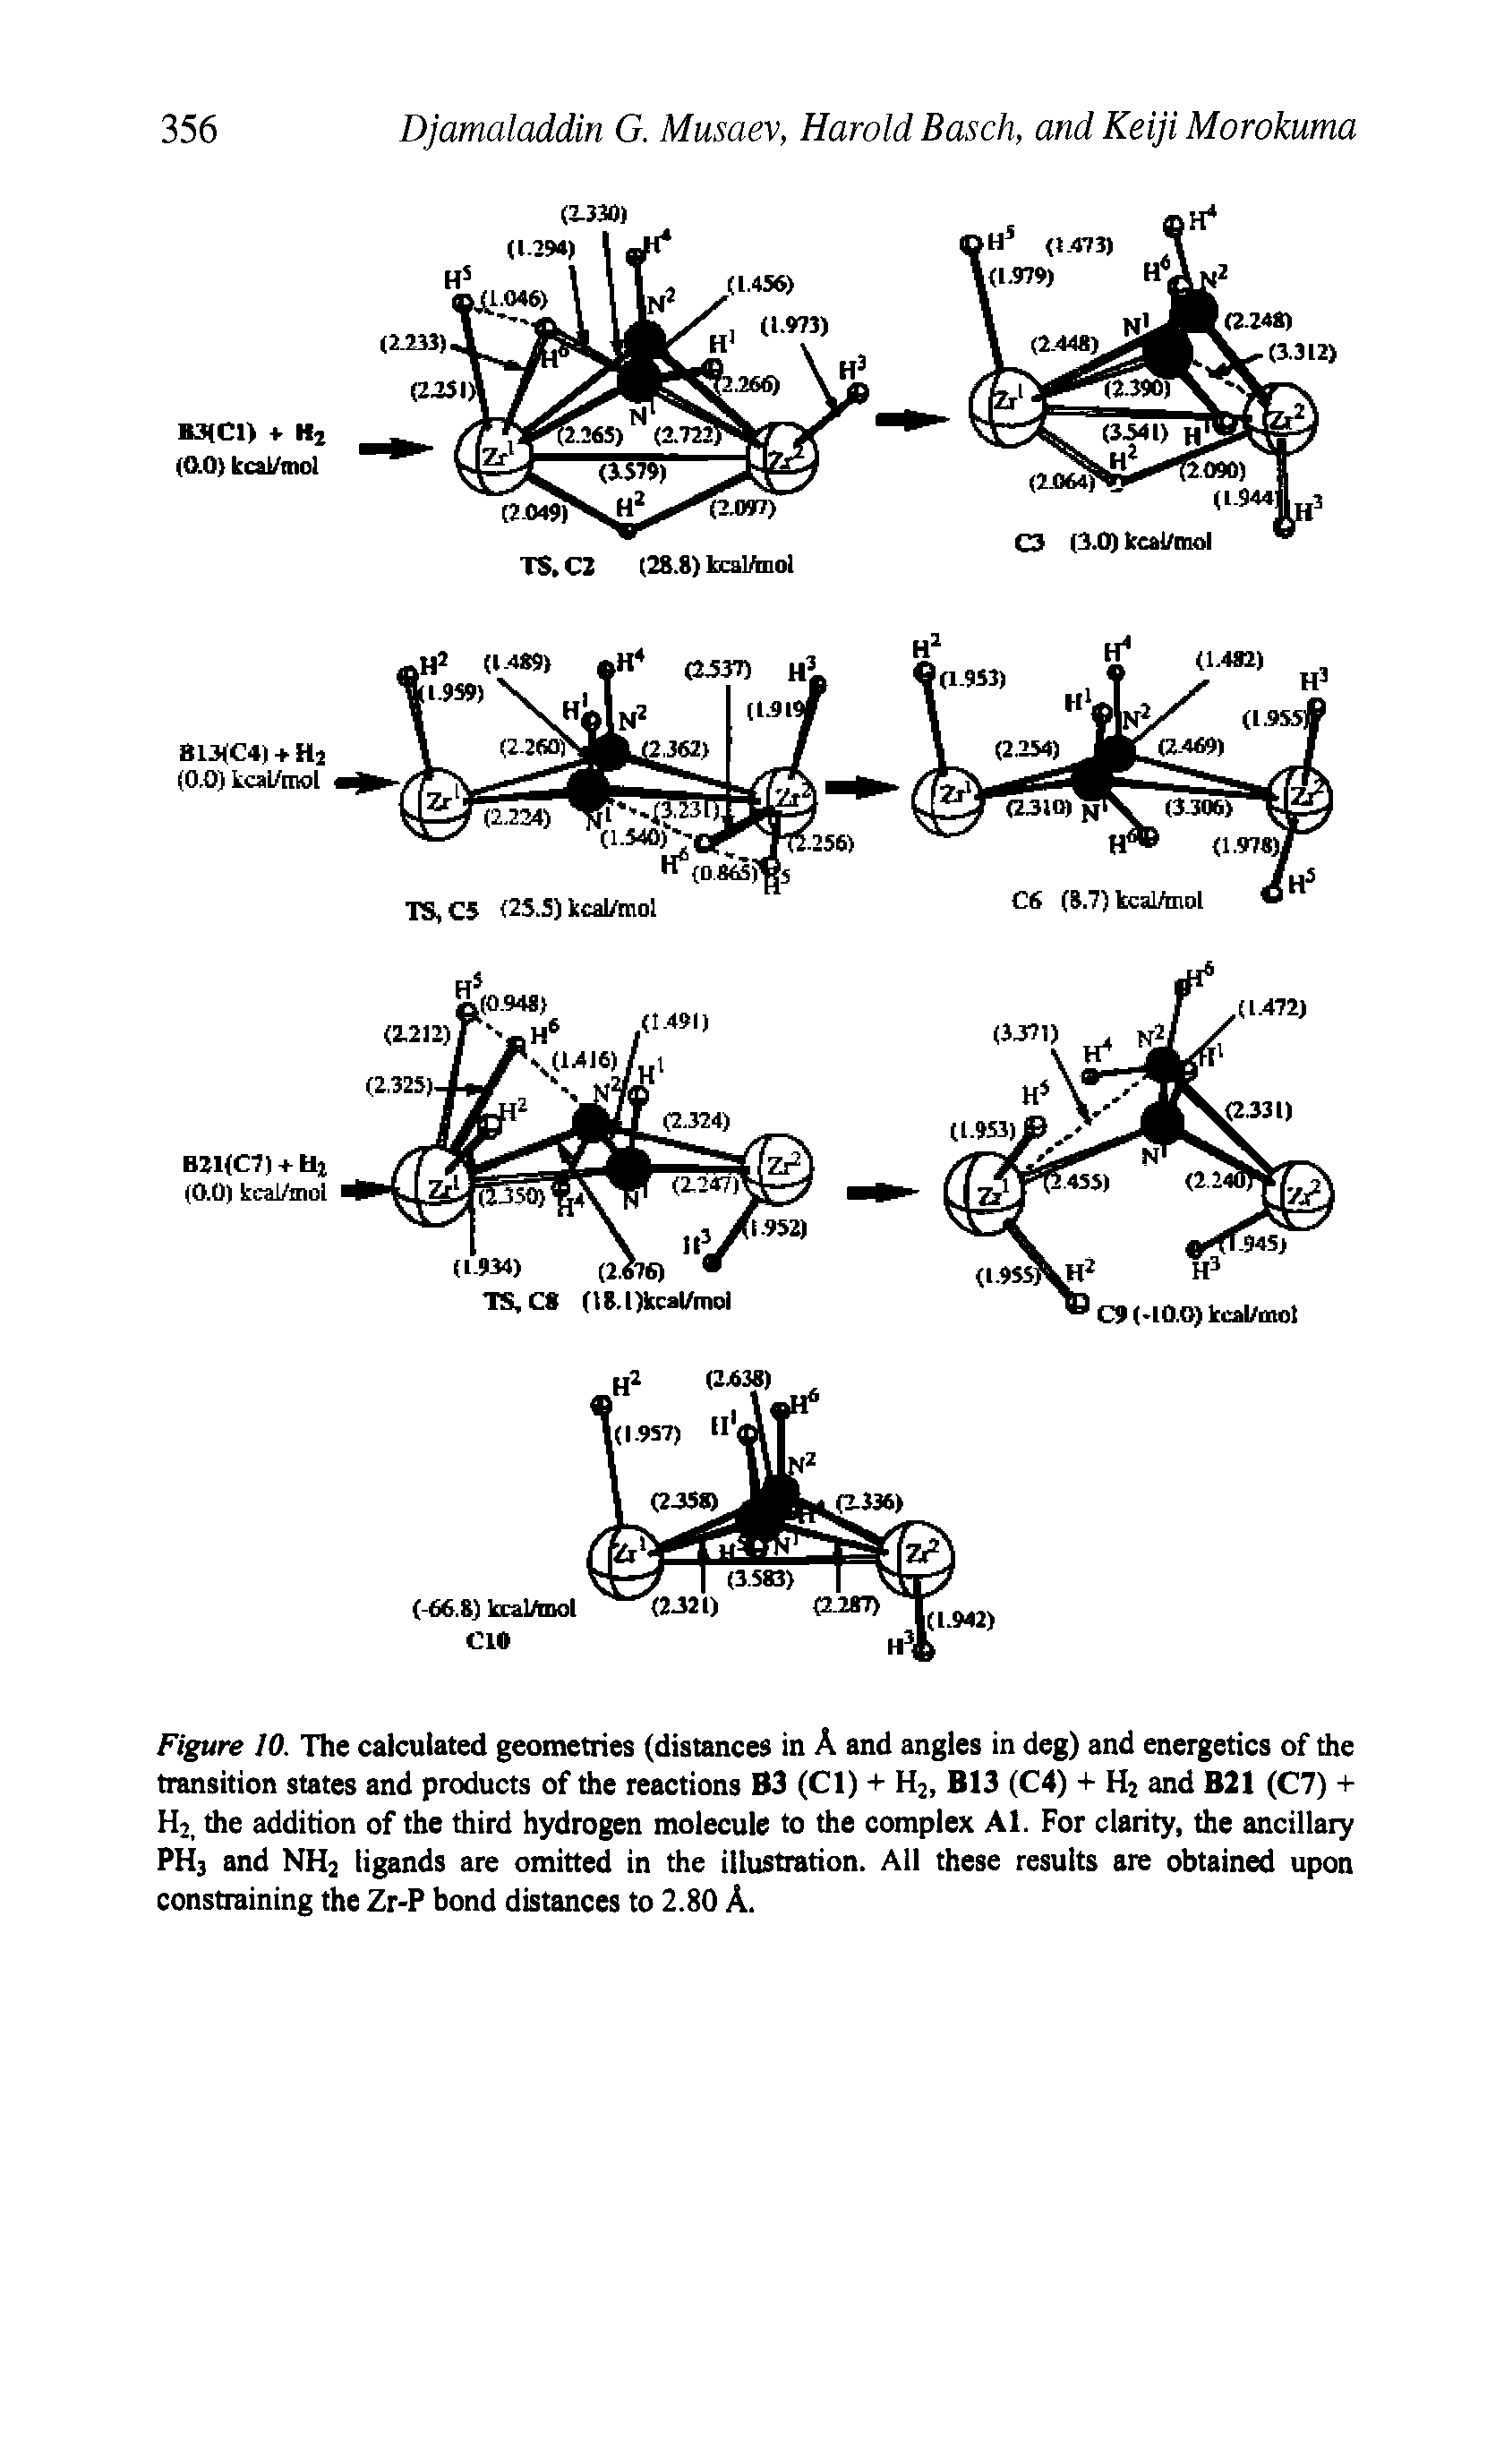 Figure 10. The calculated geometries (distances in A and angles in deg) and energetics of the transition states and products of the reactions B3 (Cl) + H2, B13 (C4) + H2 and B21 (C7) + H2i the addition of the third hydrogen molecule to the complex Al. For clarity, the ancillary PH3 and NH2 ligands are omitted in the illustration. All these results are obtained upon constraining the Zr-P bond distances to 2.80 A.